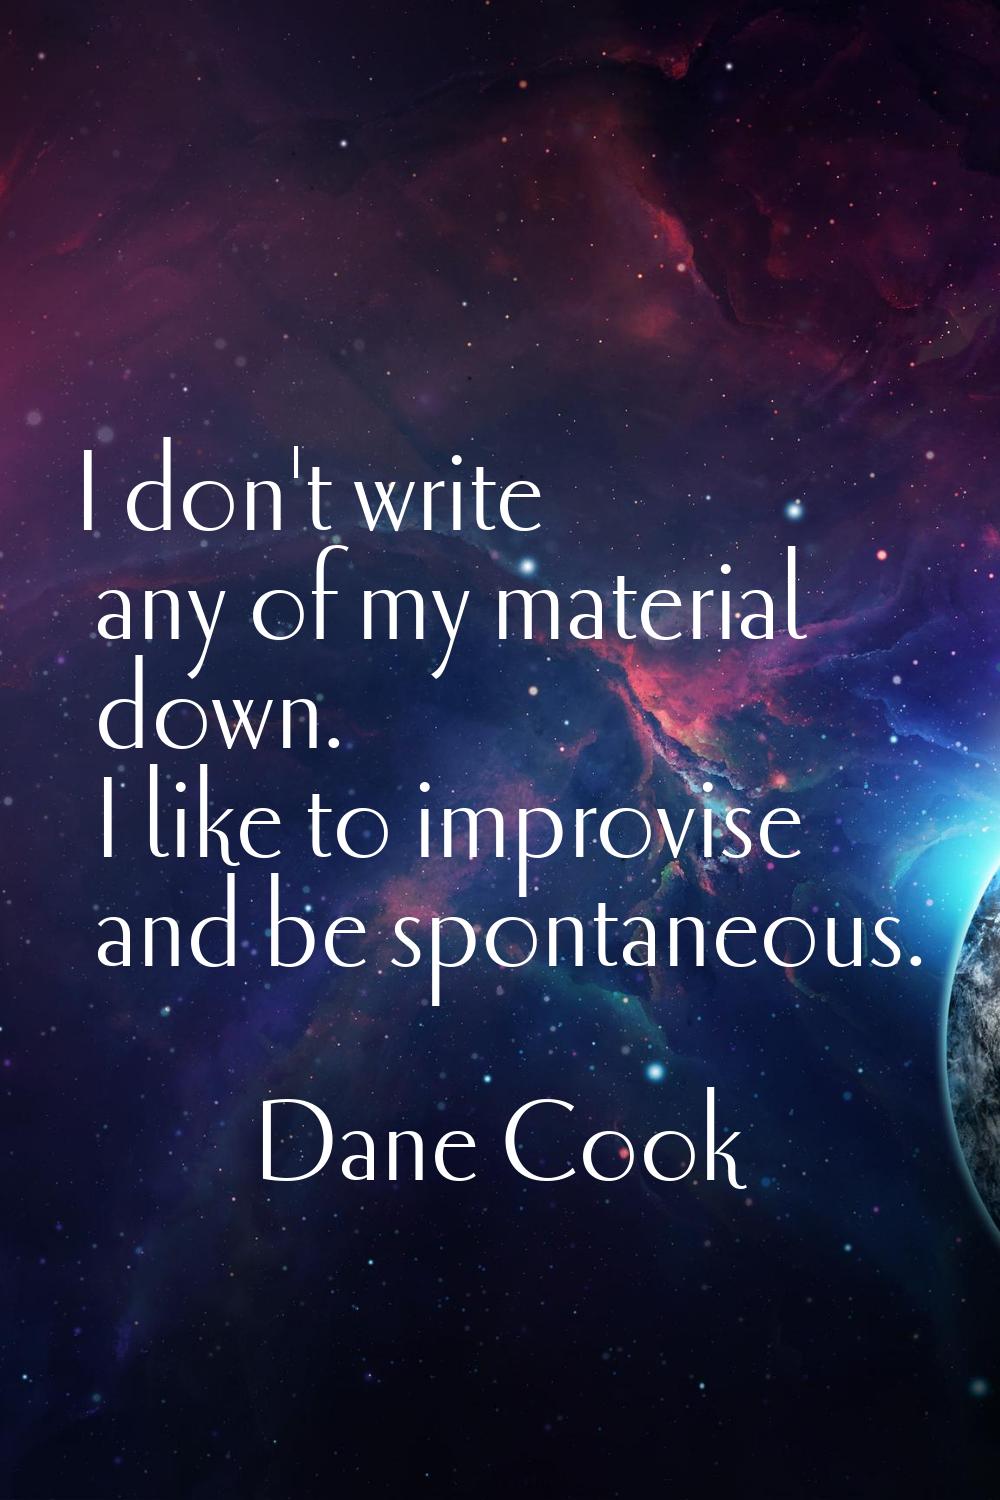 I don't write any of my material down. I like to improvise and be spontaneous.